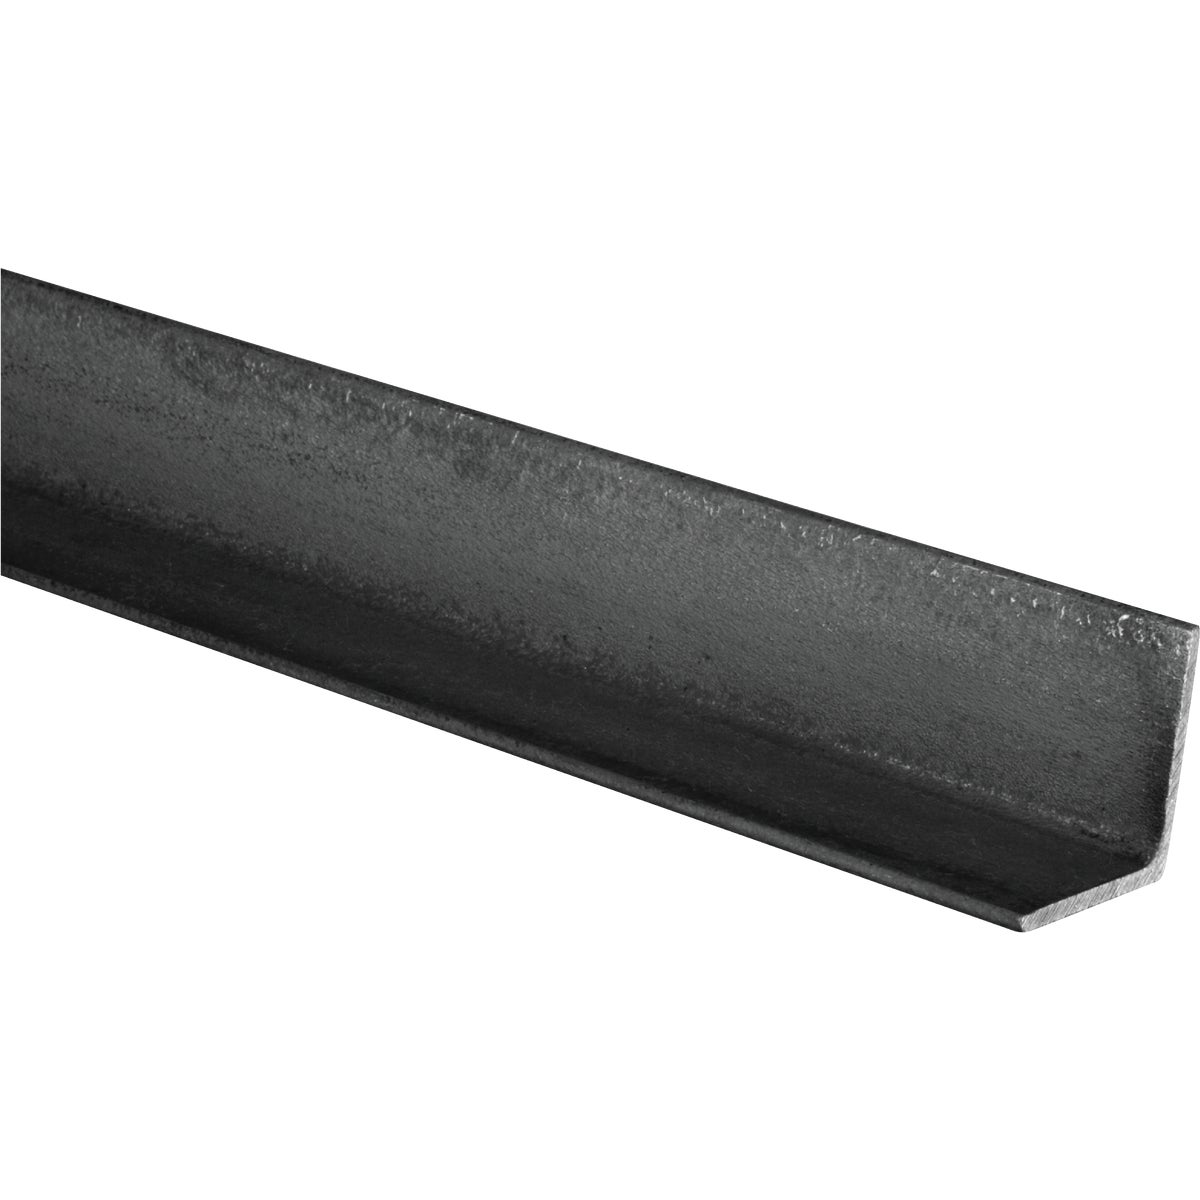 Hillman Steelworks 1 In. x 4 Ft., 1/8 In. Weldable Solid Angle